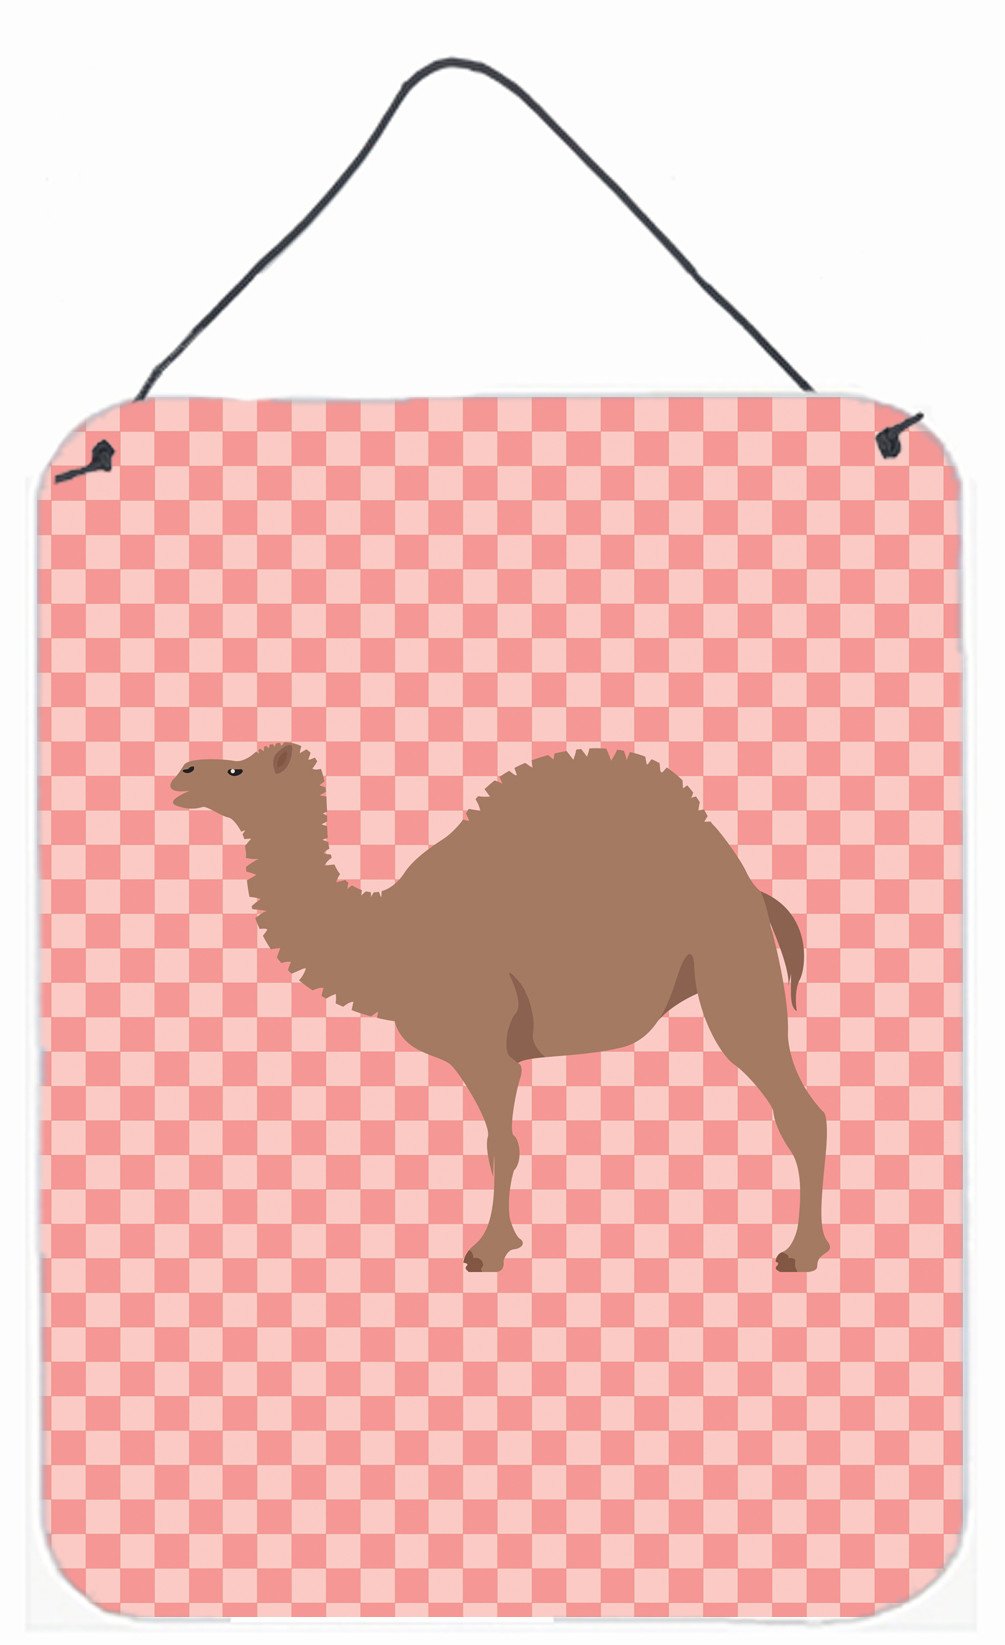 F1 Hybrid Camel Pink Check Wall or Door Hanging Prints BB7819DS1216 by Caroline's Treasures